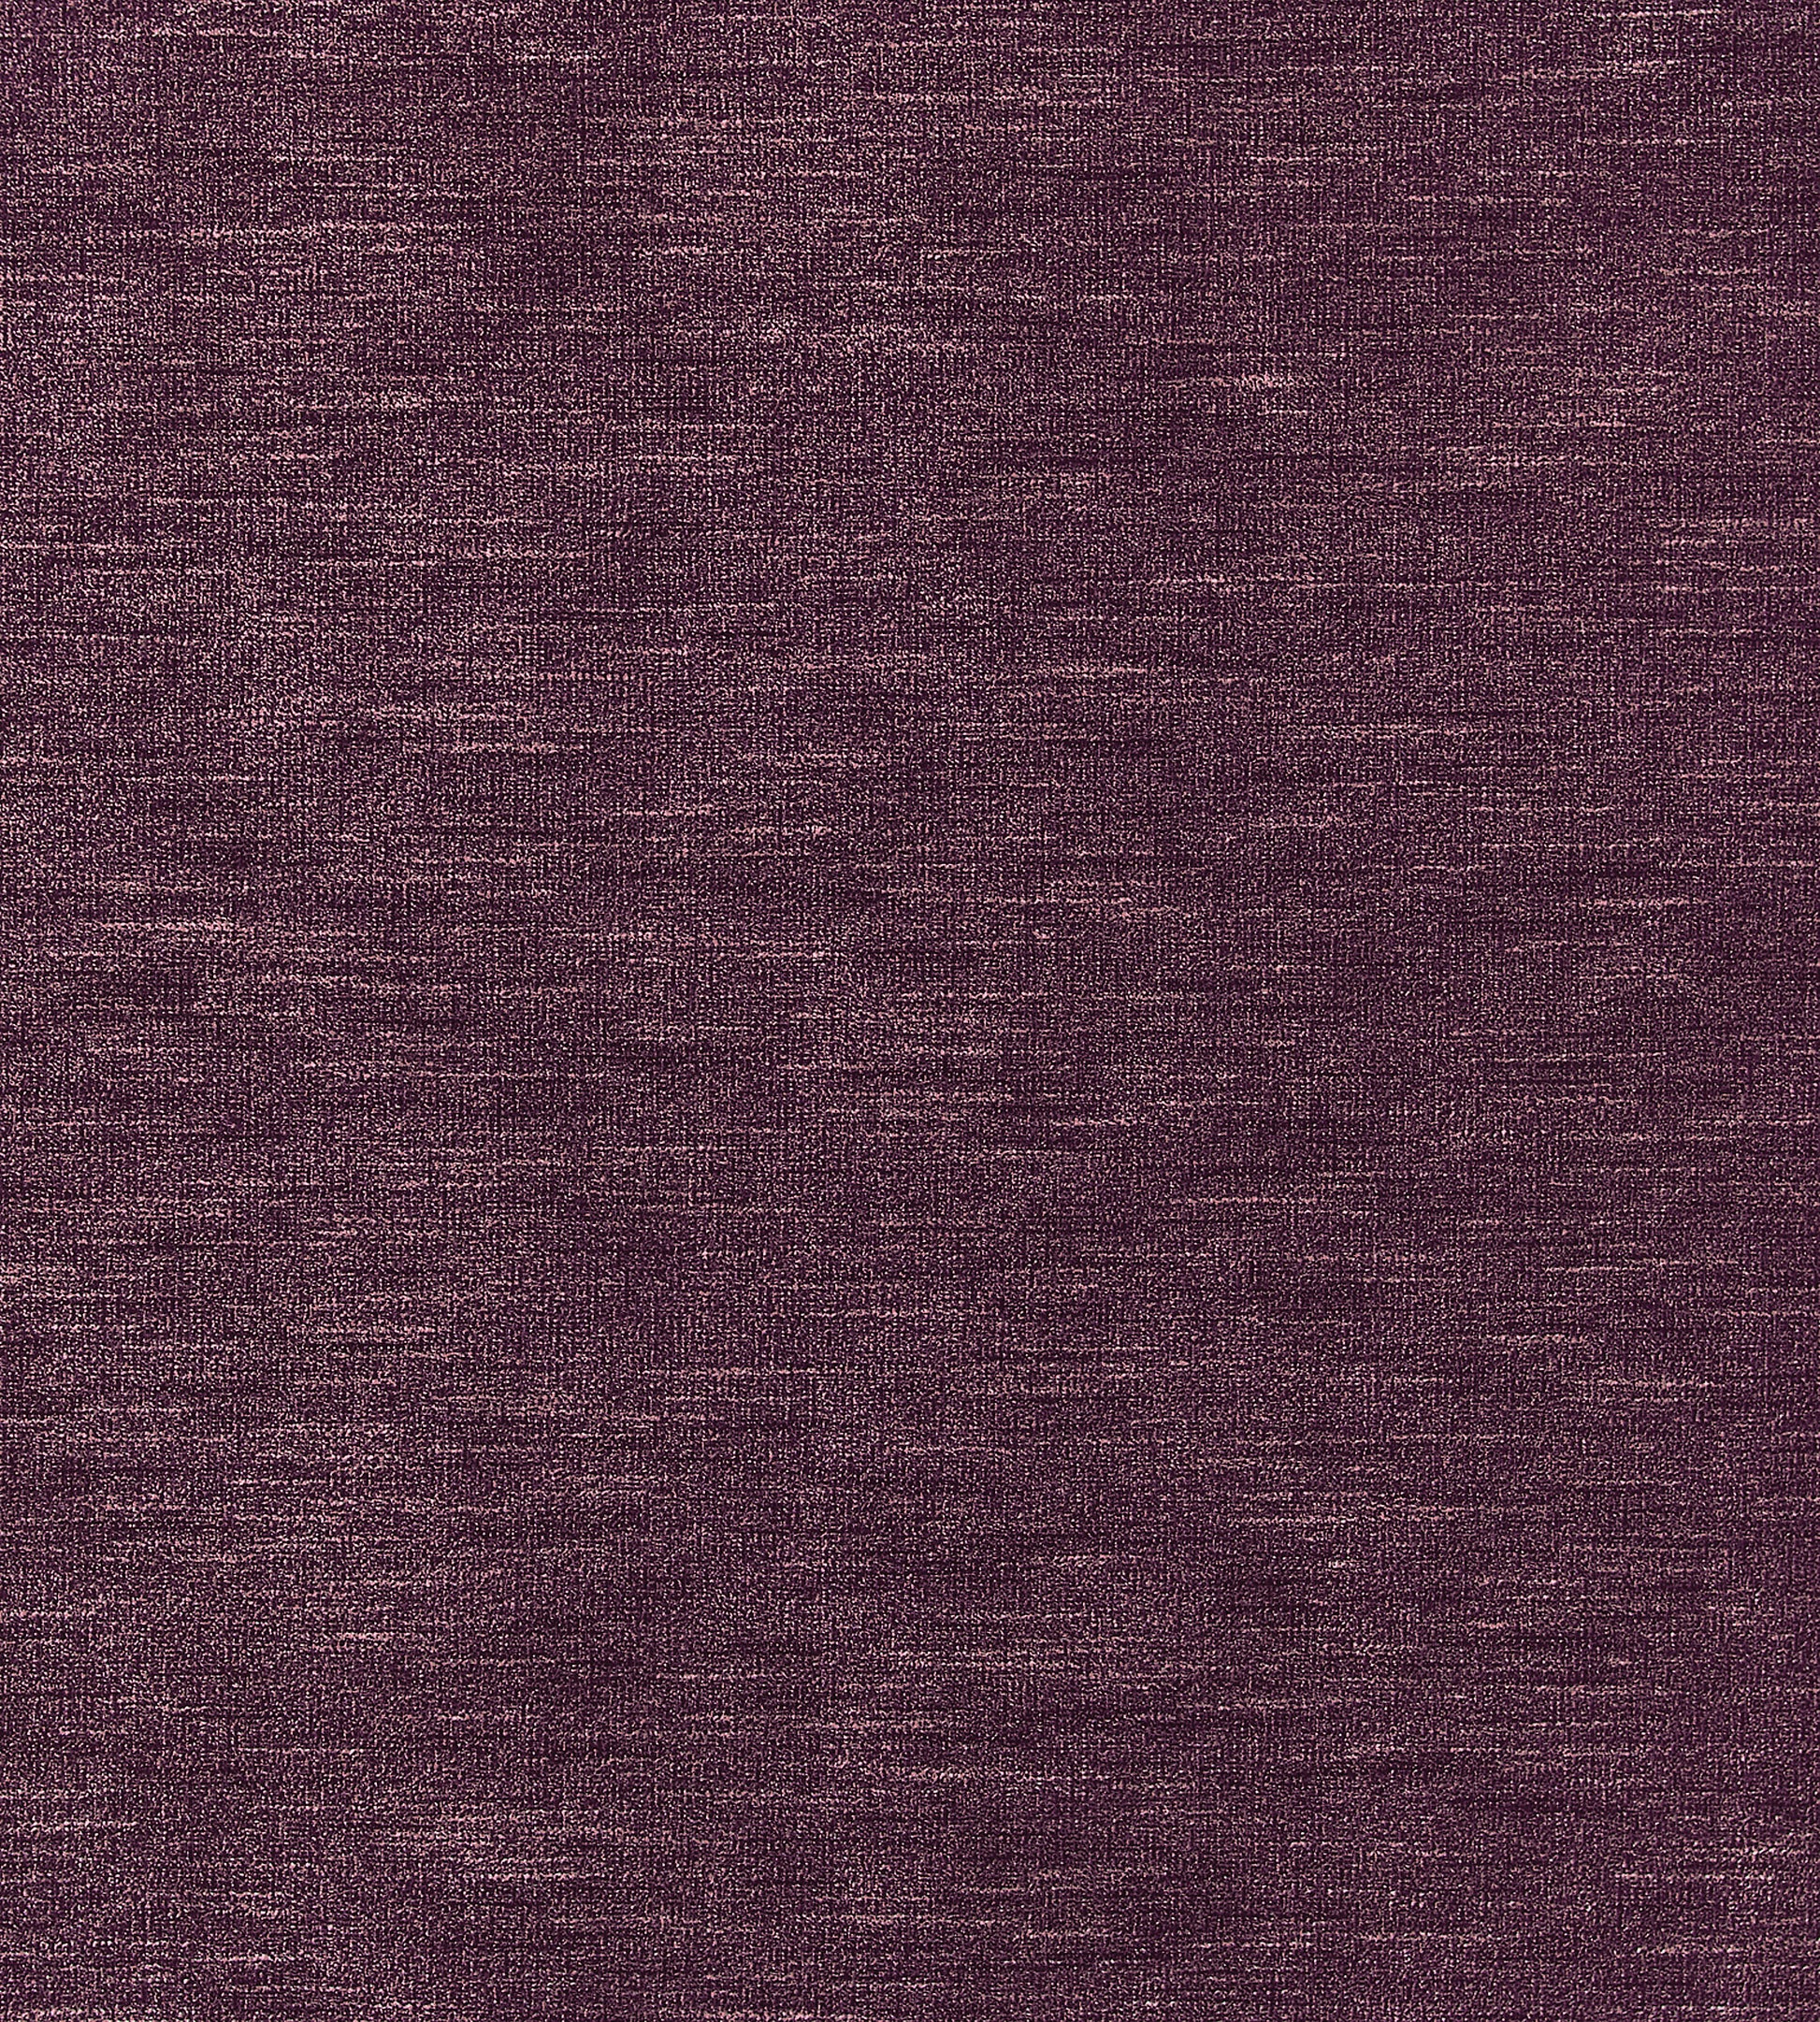 Purchase Old World Weavers Fabric Pattern number VP 0890SUPR, Supreme Velvet Plum Perfect 1